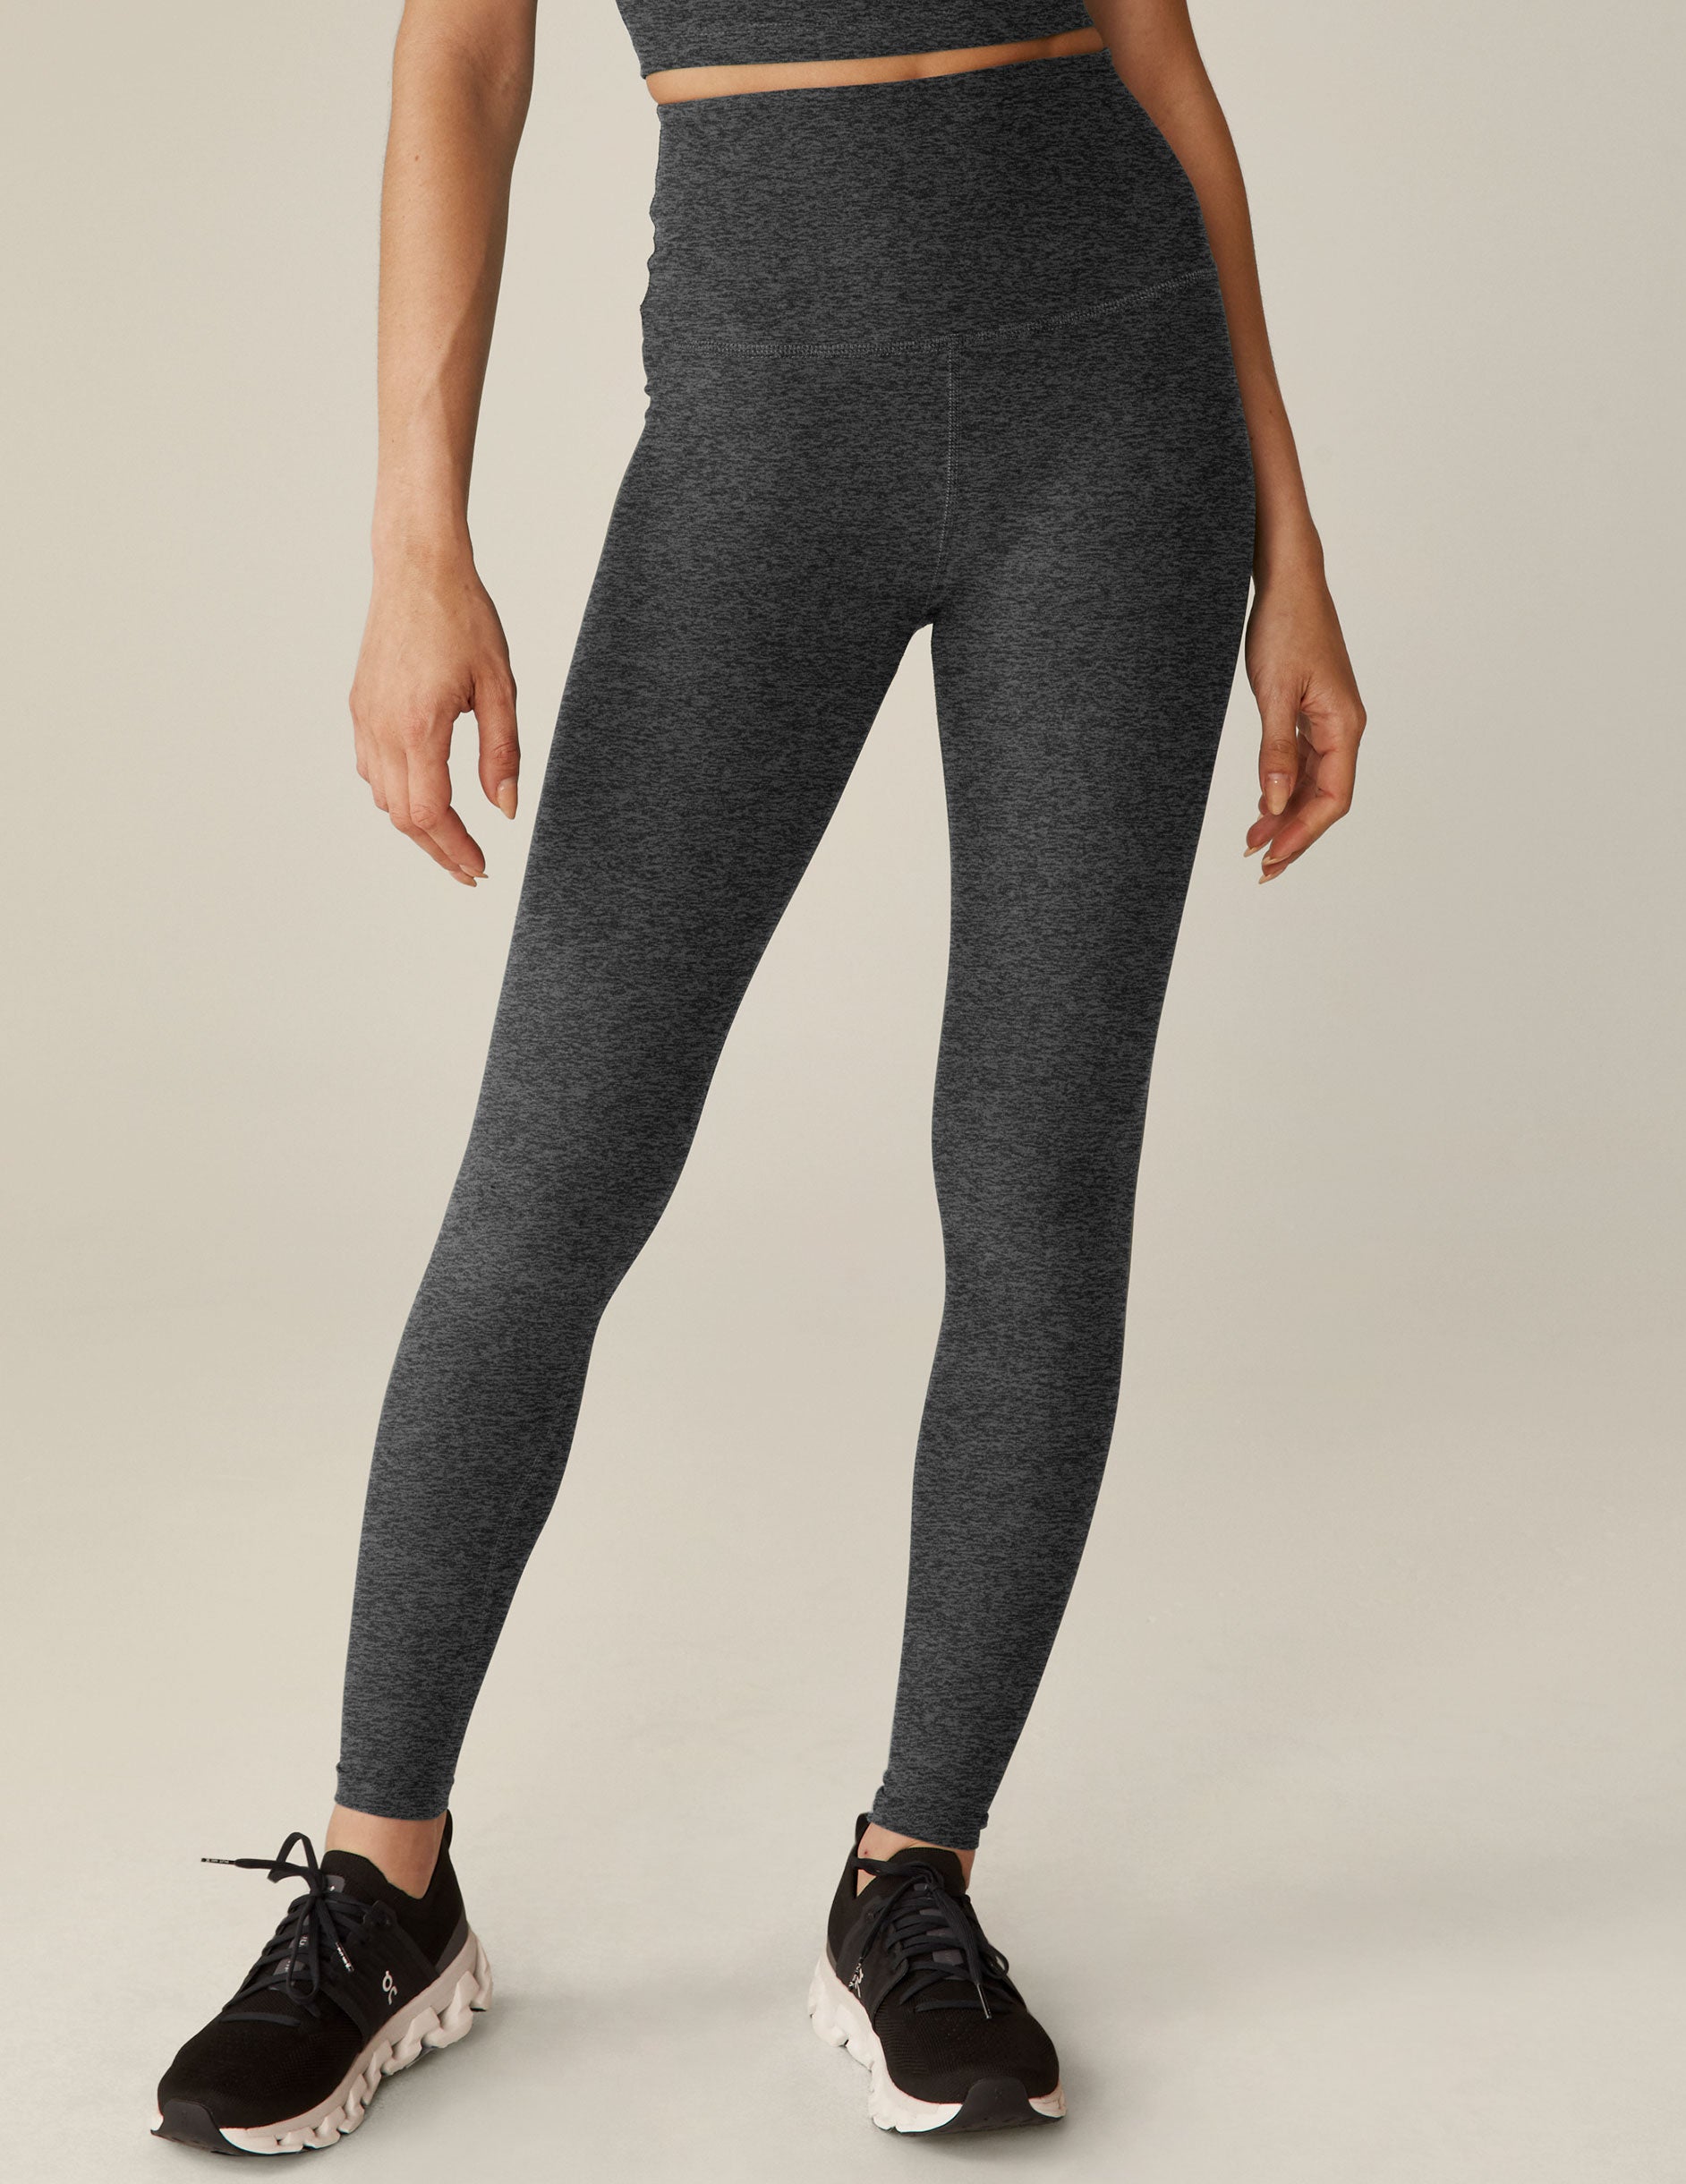 Yoga 31 Inseam, Shop The Largest Collection